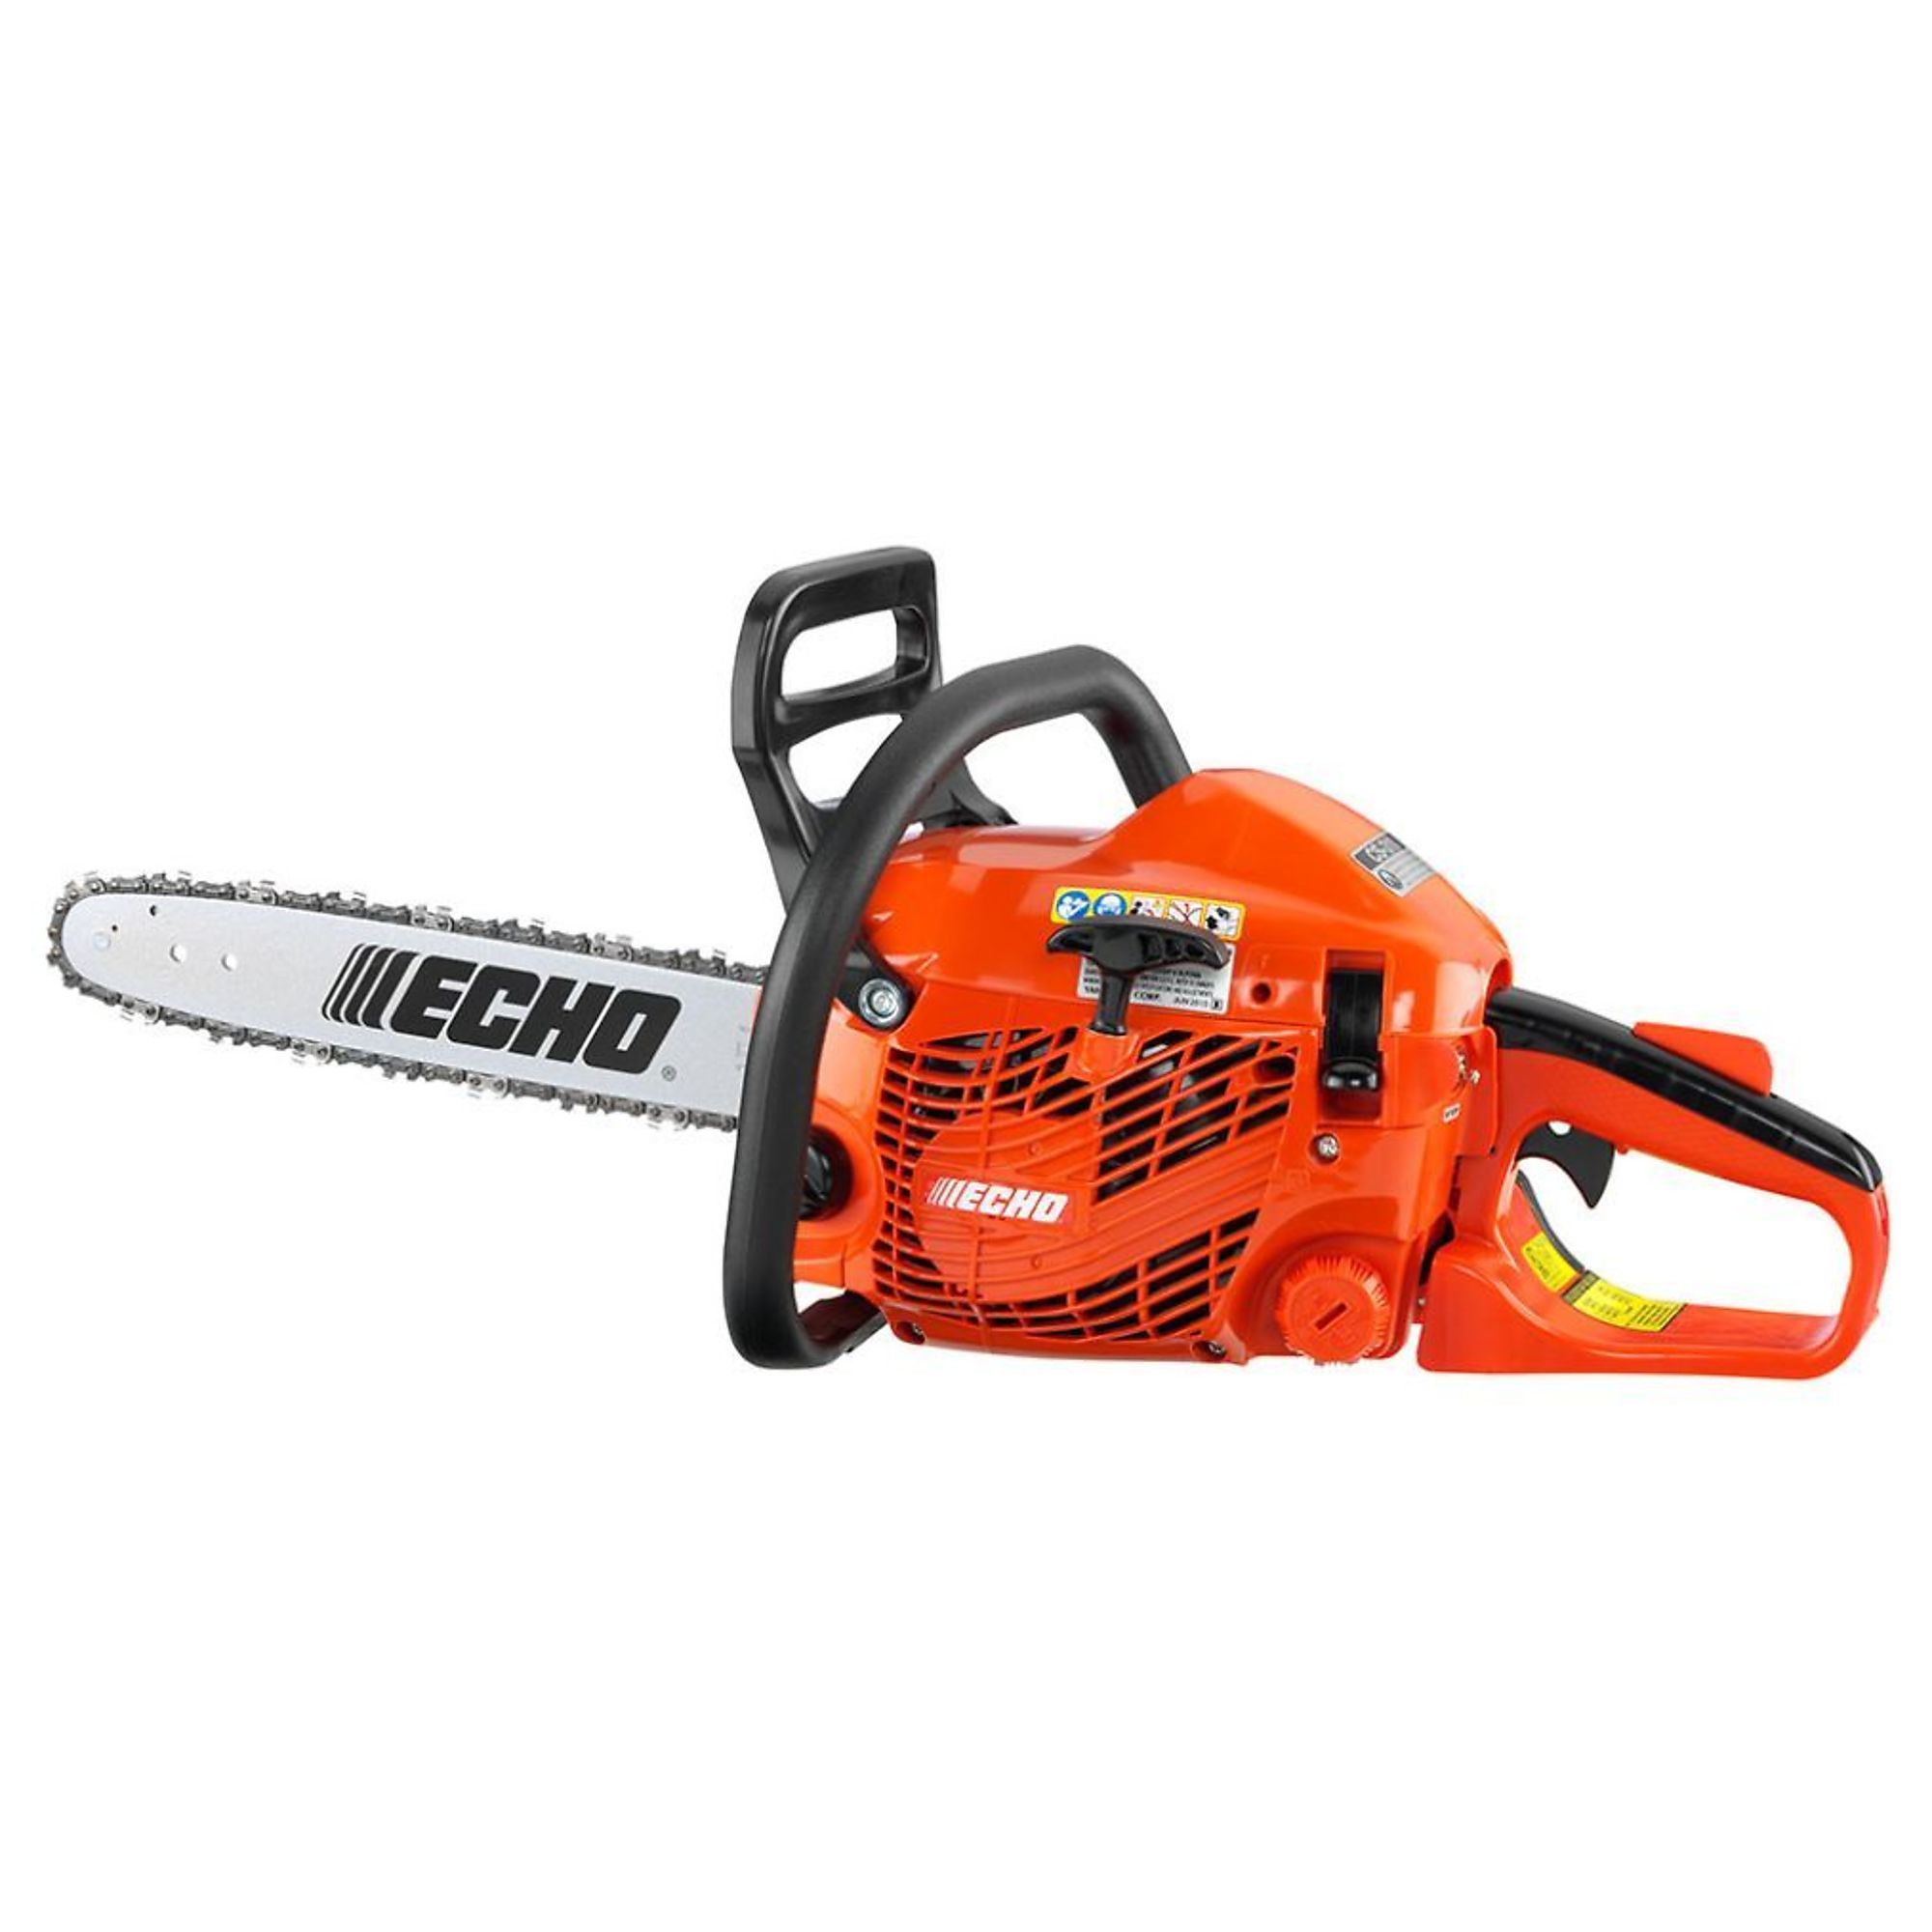 ECHO, Gas-Powered Rear Handle Chainsaw, Bar Length 14 in, Engine Displacement 30.5 cc, Model CS-310-14